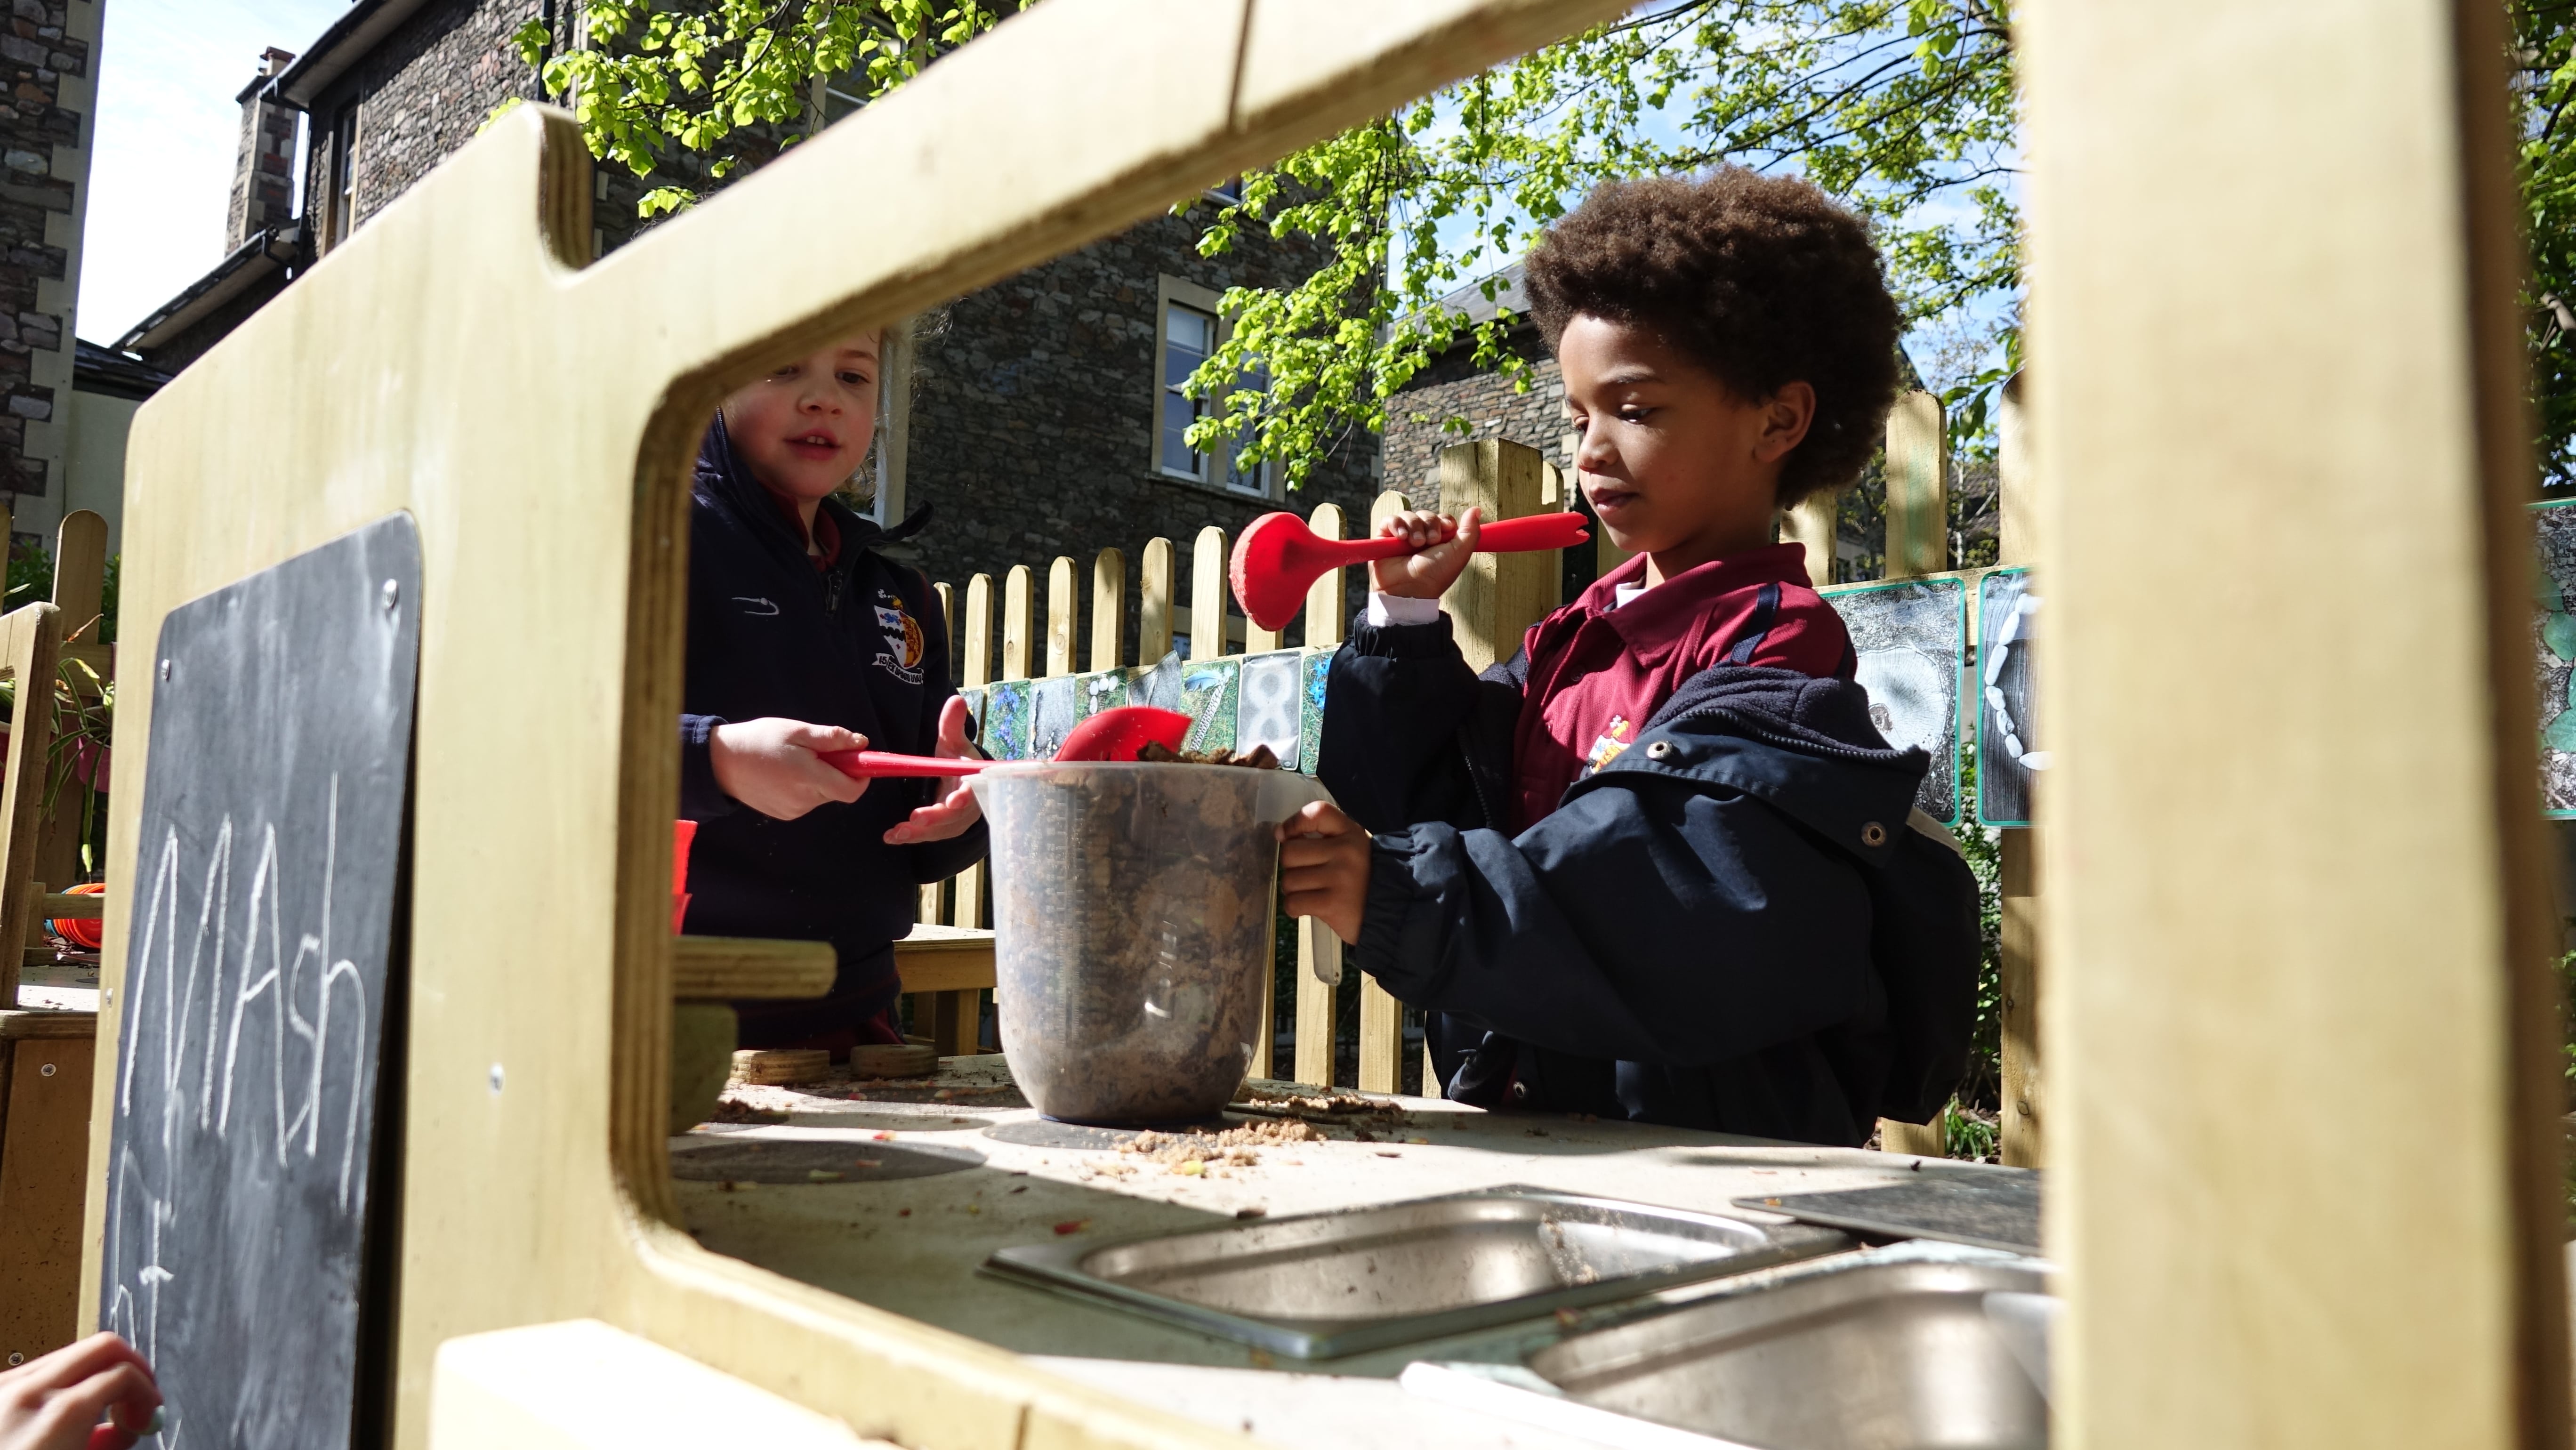 2 Children are using the mud kitchen. The children are filling a plastic jug with leaves and mud and mixing it with a plastic spoon. A chalkboard can be seen on the front, with the word "Mash" written on it,